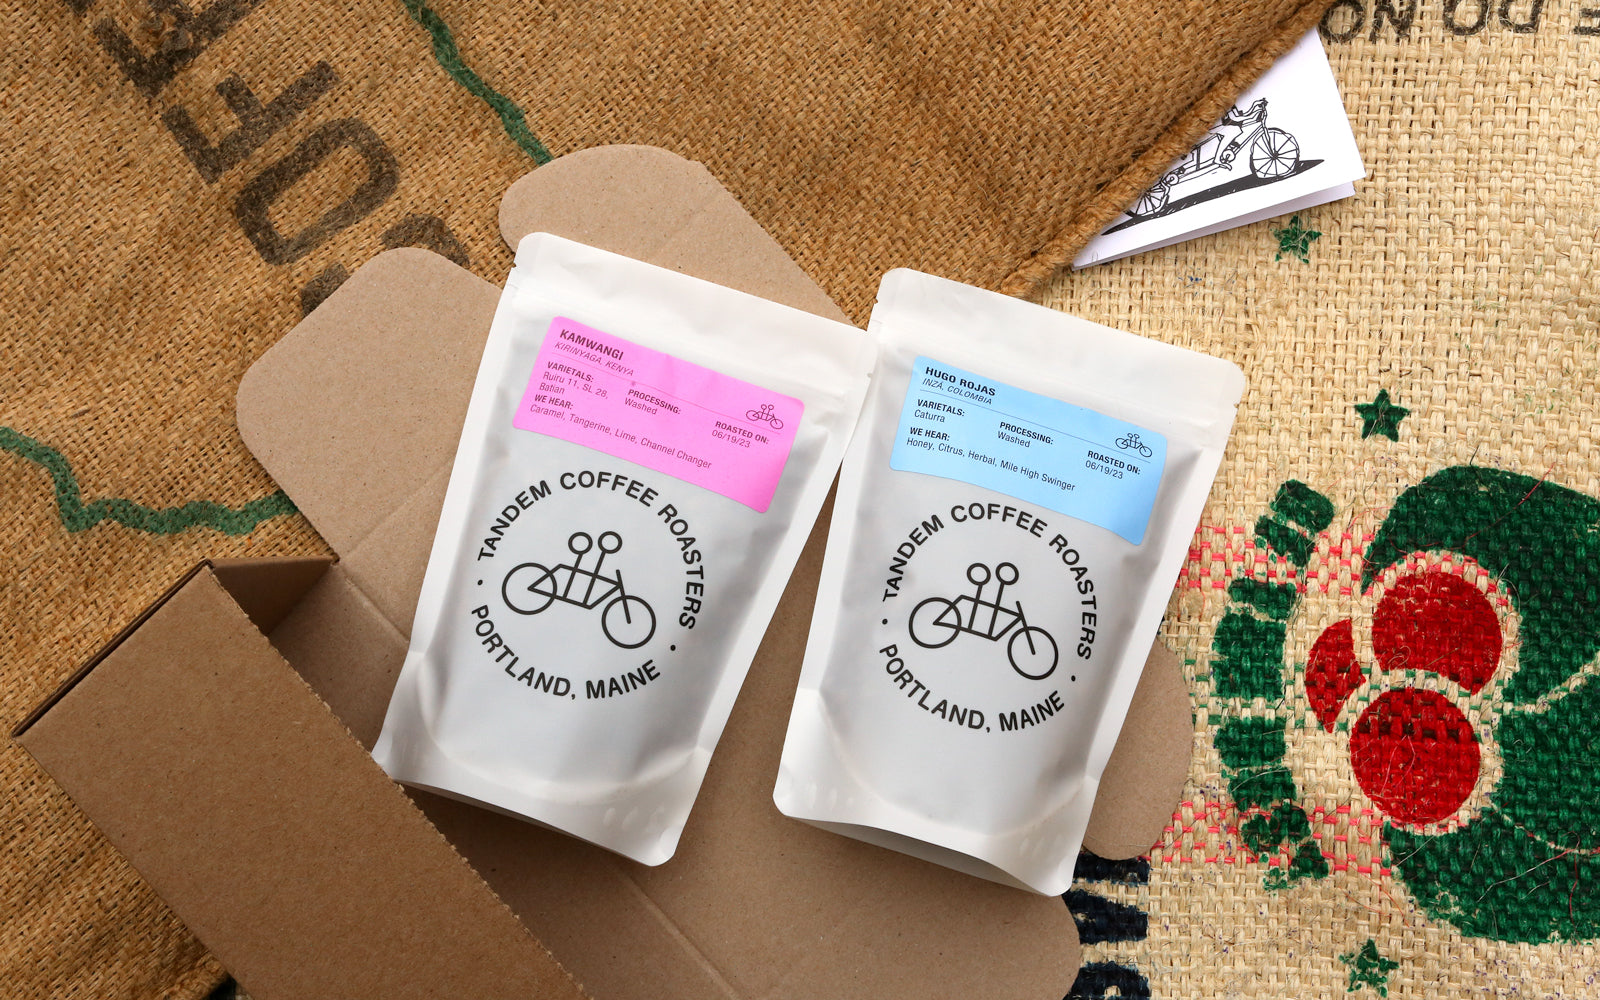 Two coffee bags labeled "warden coffee roasters - portland, maine" with pink and blue labels on a burlap surface with a cardboard box and floral pattern.